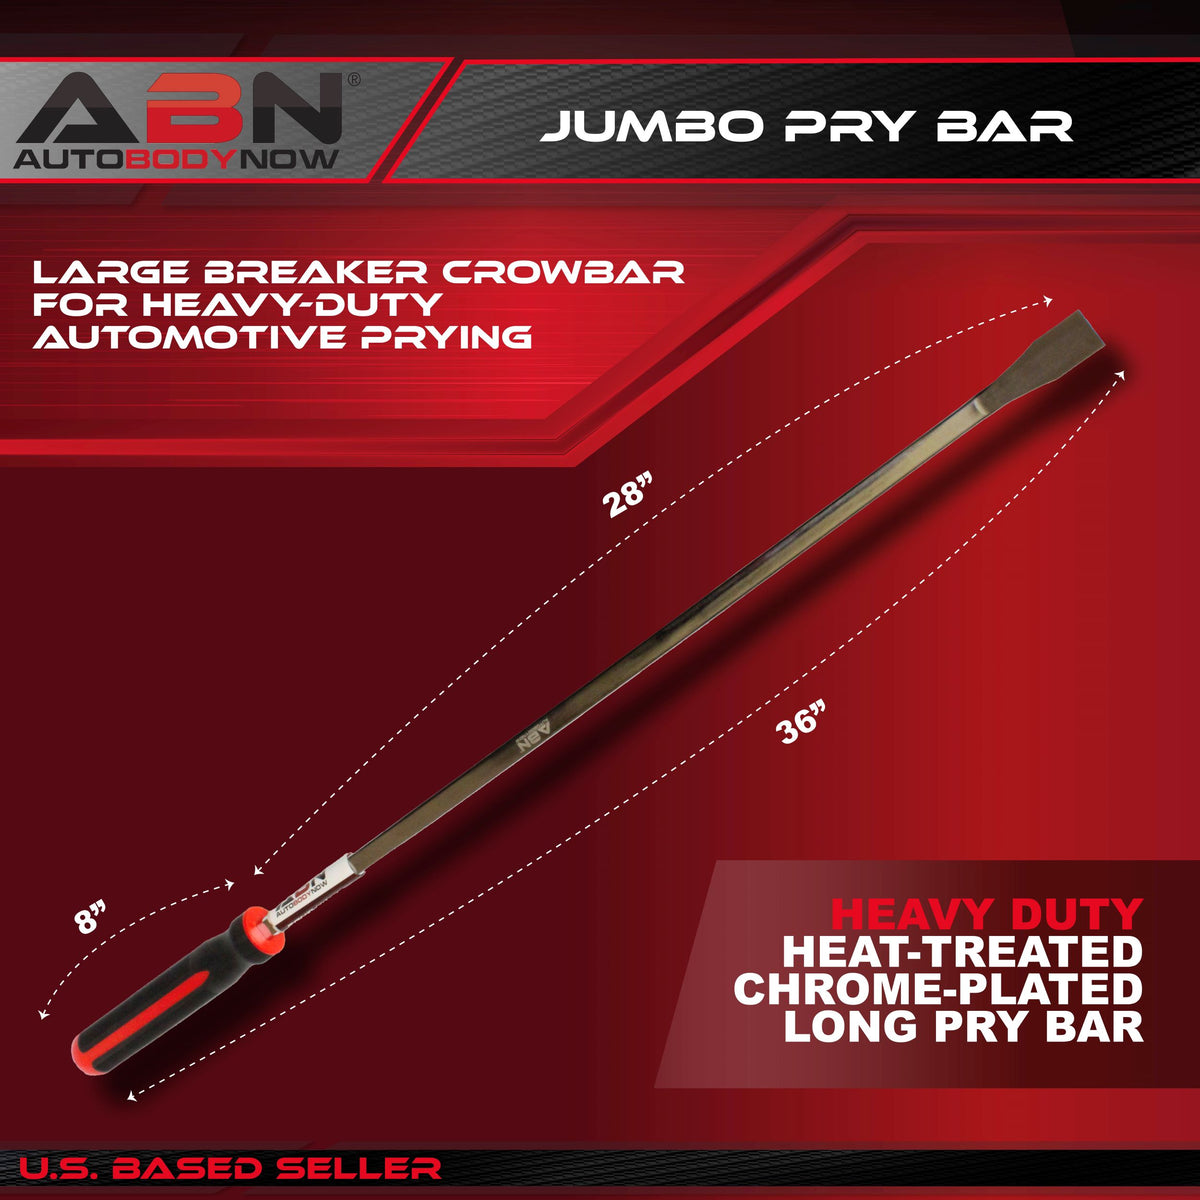 Jumbo 36” Inch Pry Bar Crowbar Breaker Tool for Automotive Prying